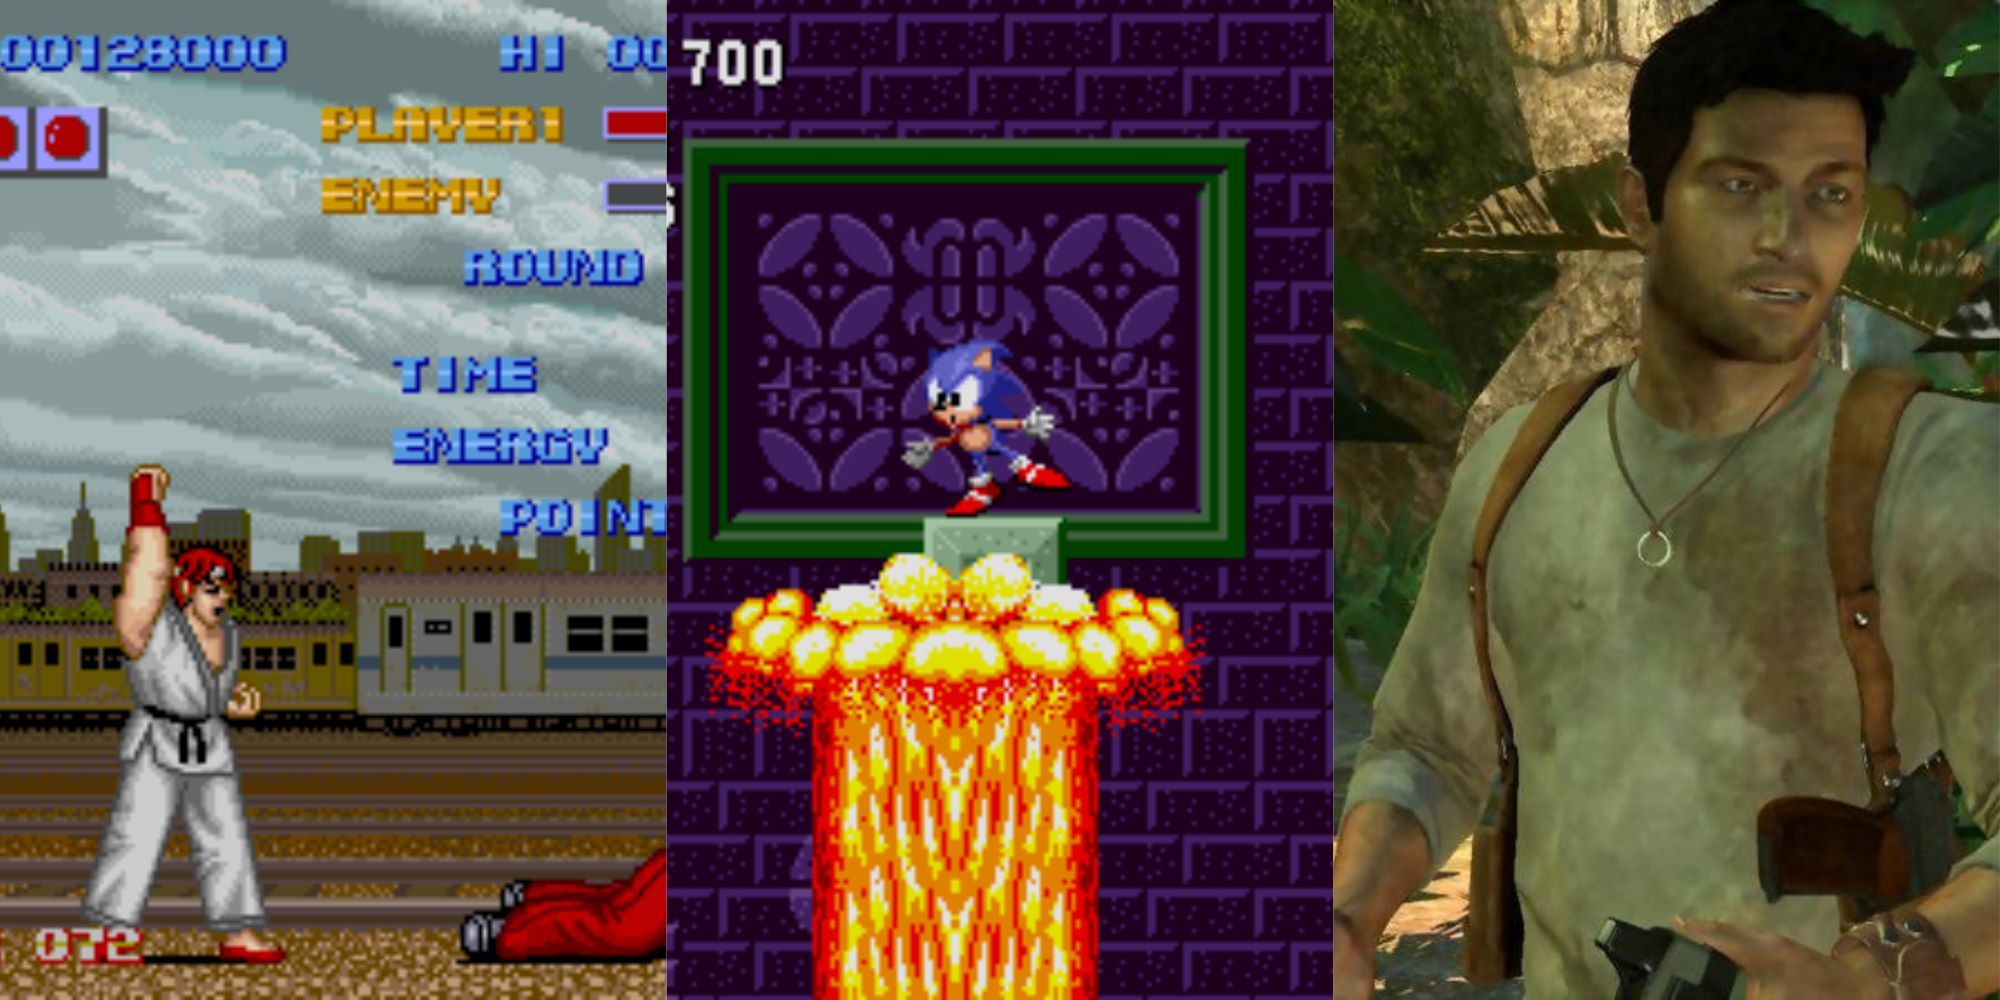 Split image: Left - Ryu from the first Street Fighter winning a fight, Middle - Sonic in Marble Zone From Sonic the Hedgehog, Right - Nathan Drake from the first Uncharted